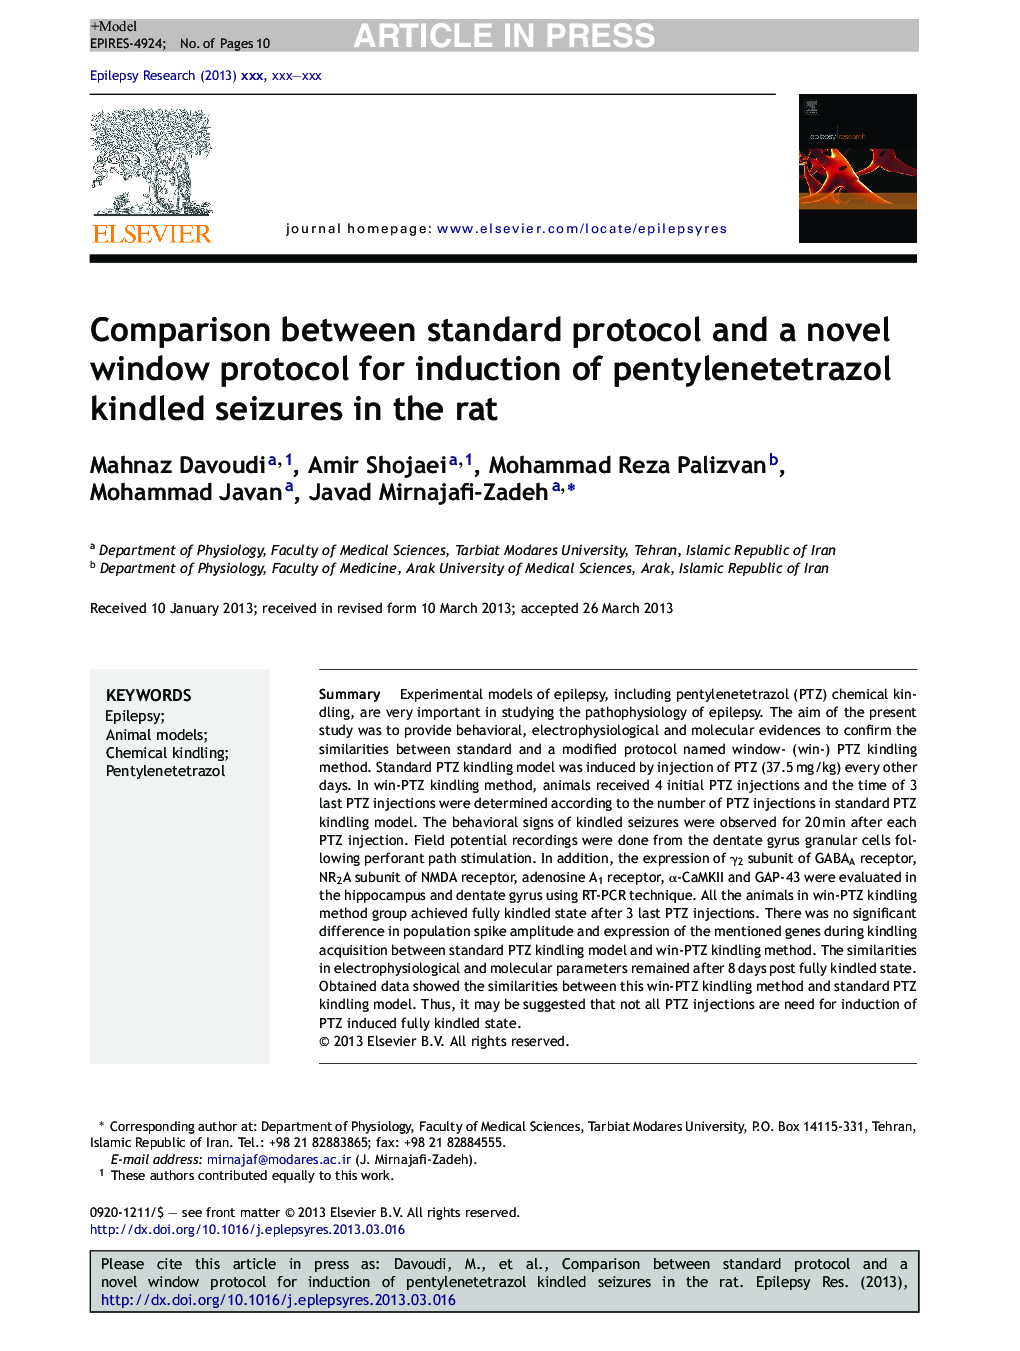 Comparison between standard protocol and a novel window protocol for induction of pentylenetetrazol kindled seizures in the rat